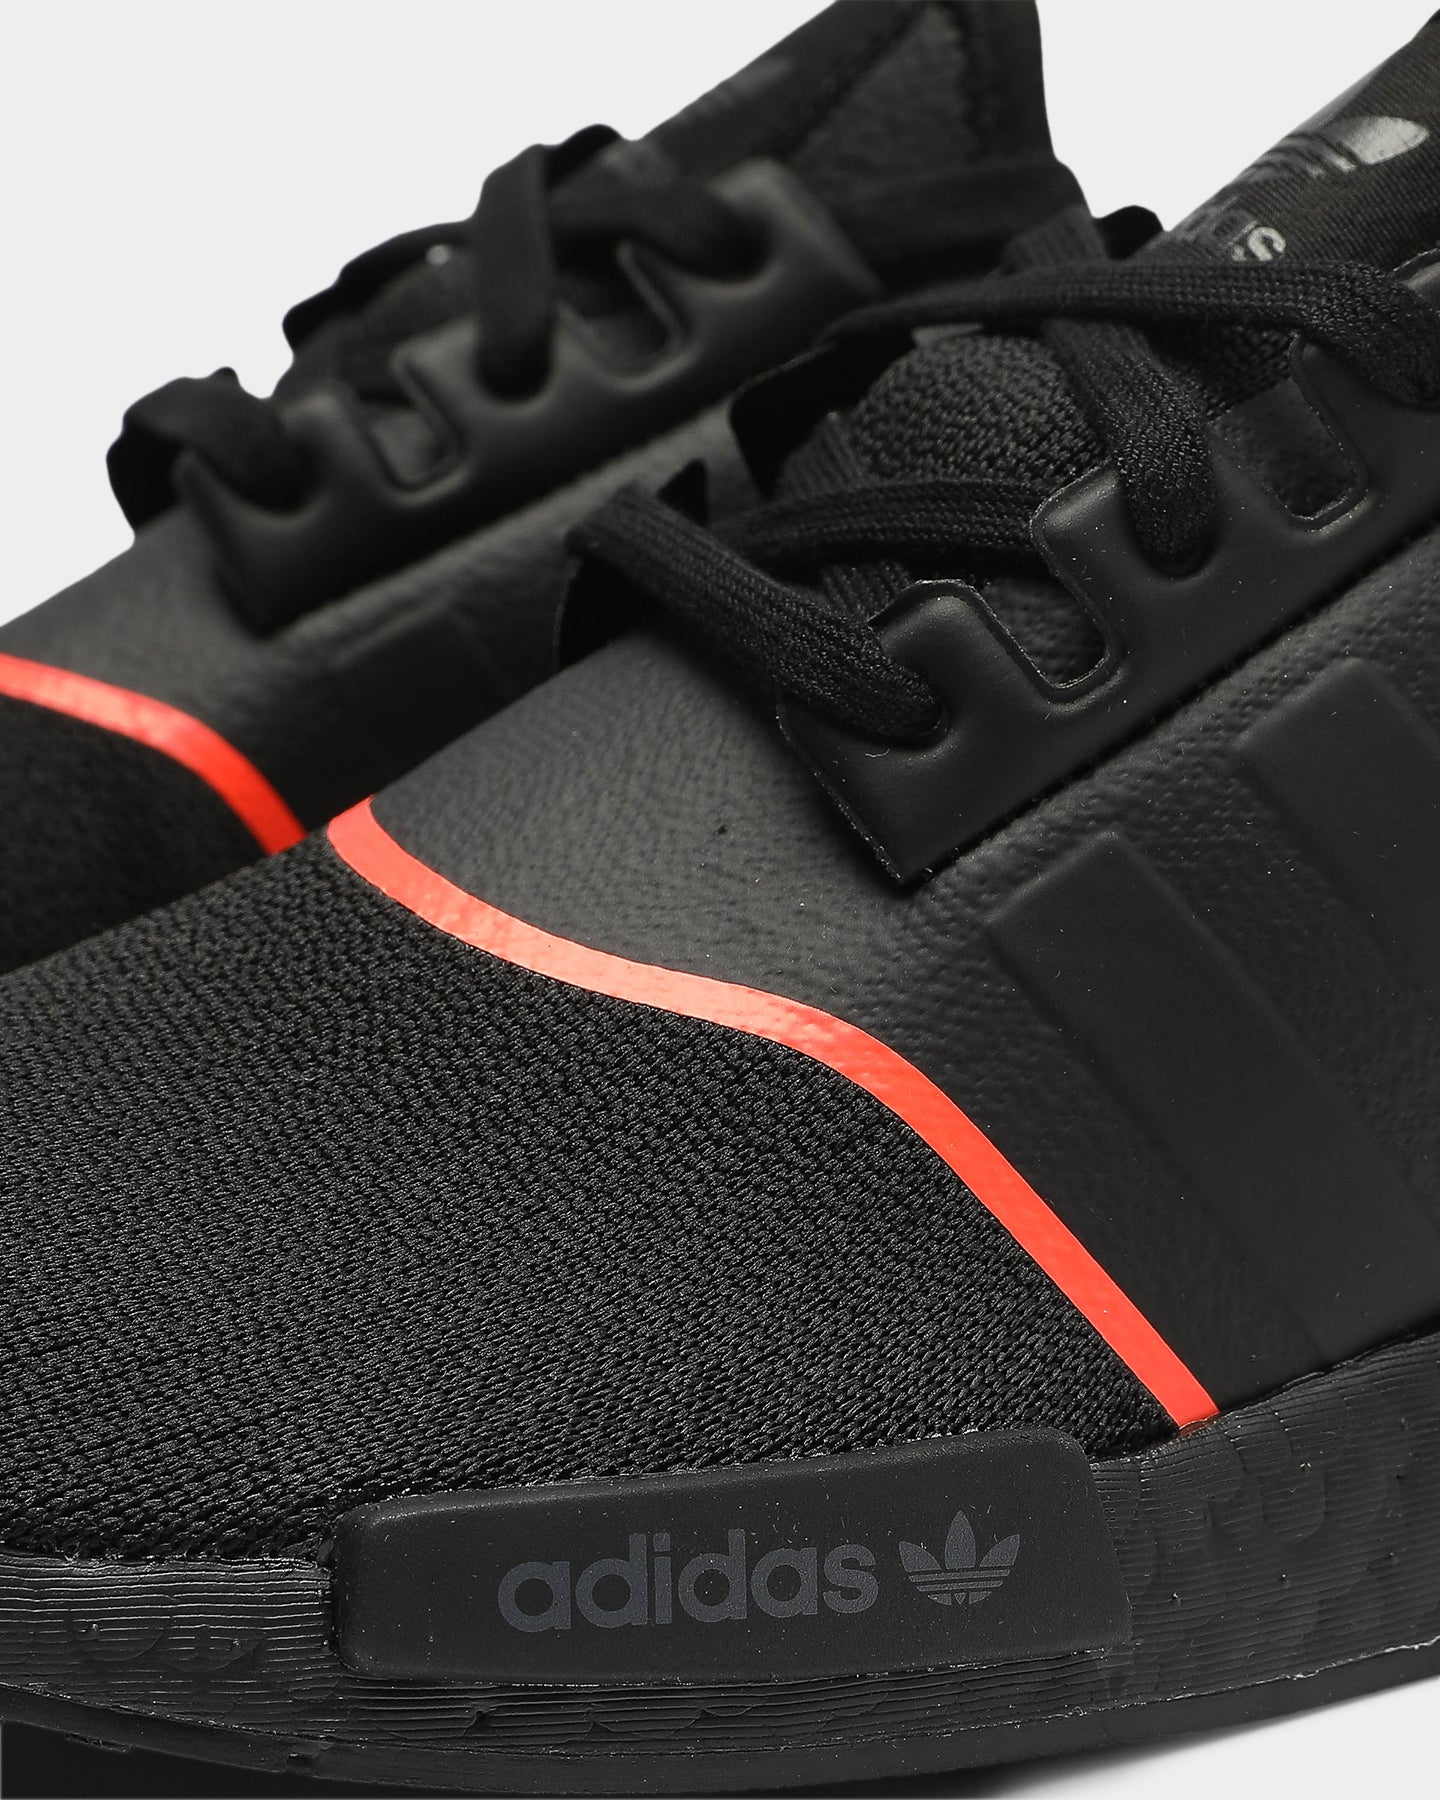 adidas nmd black with red bottom